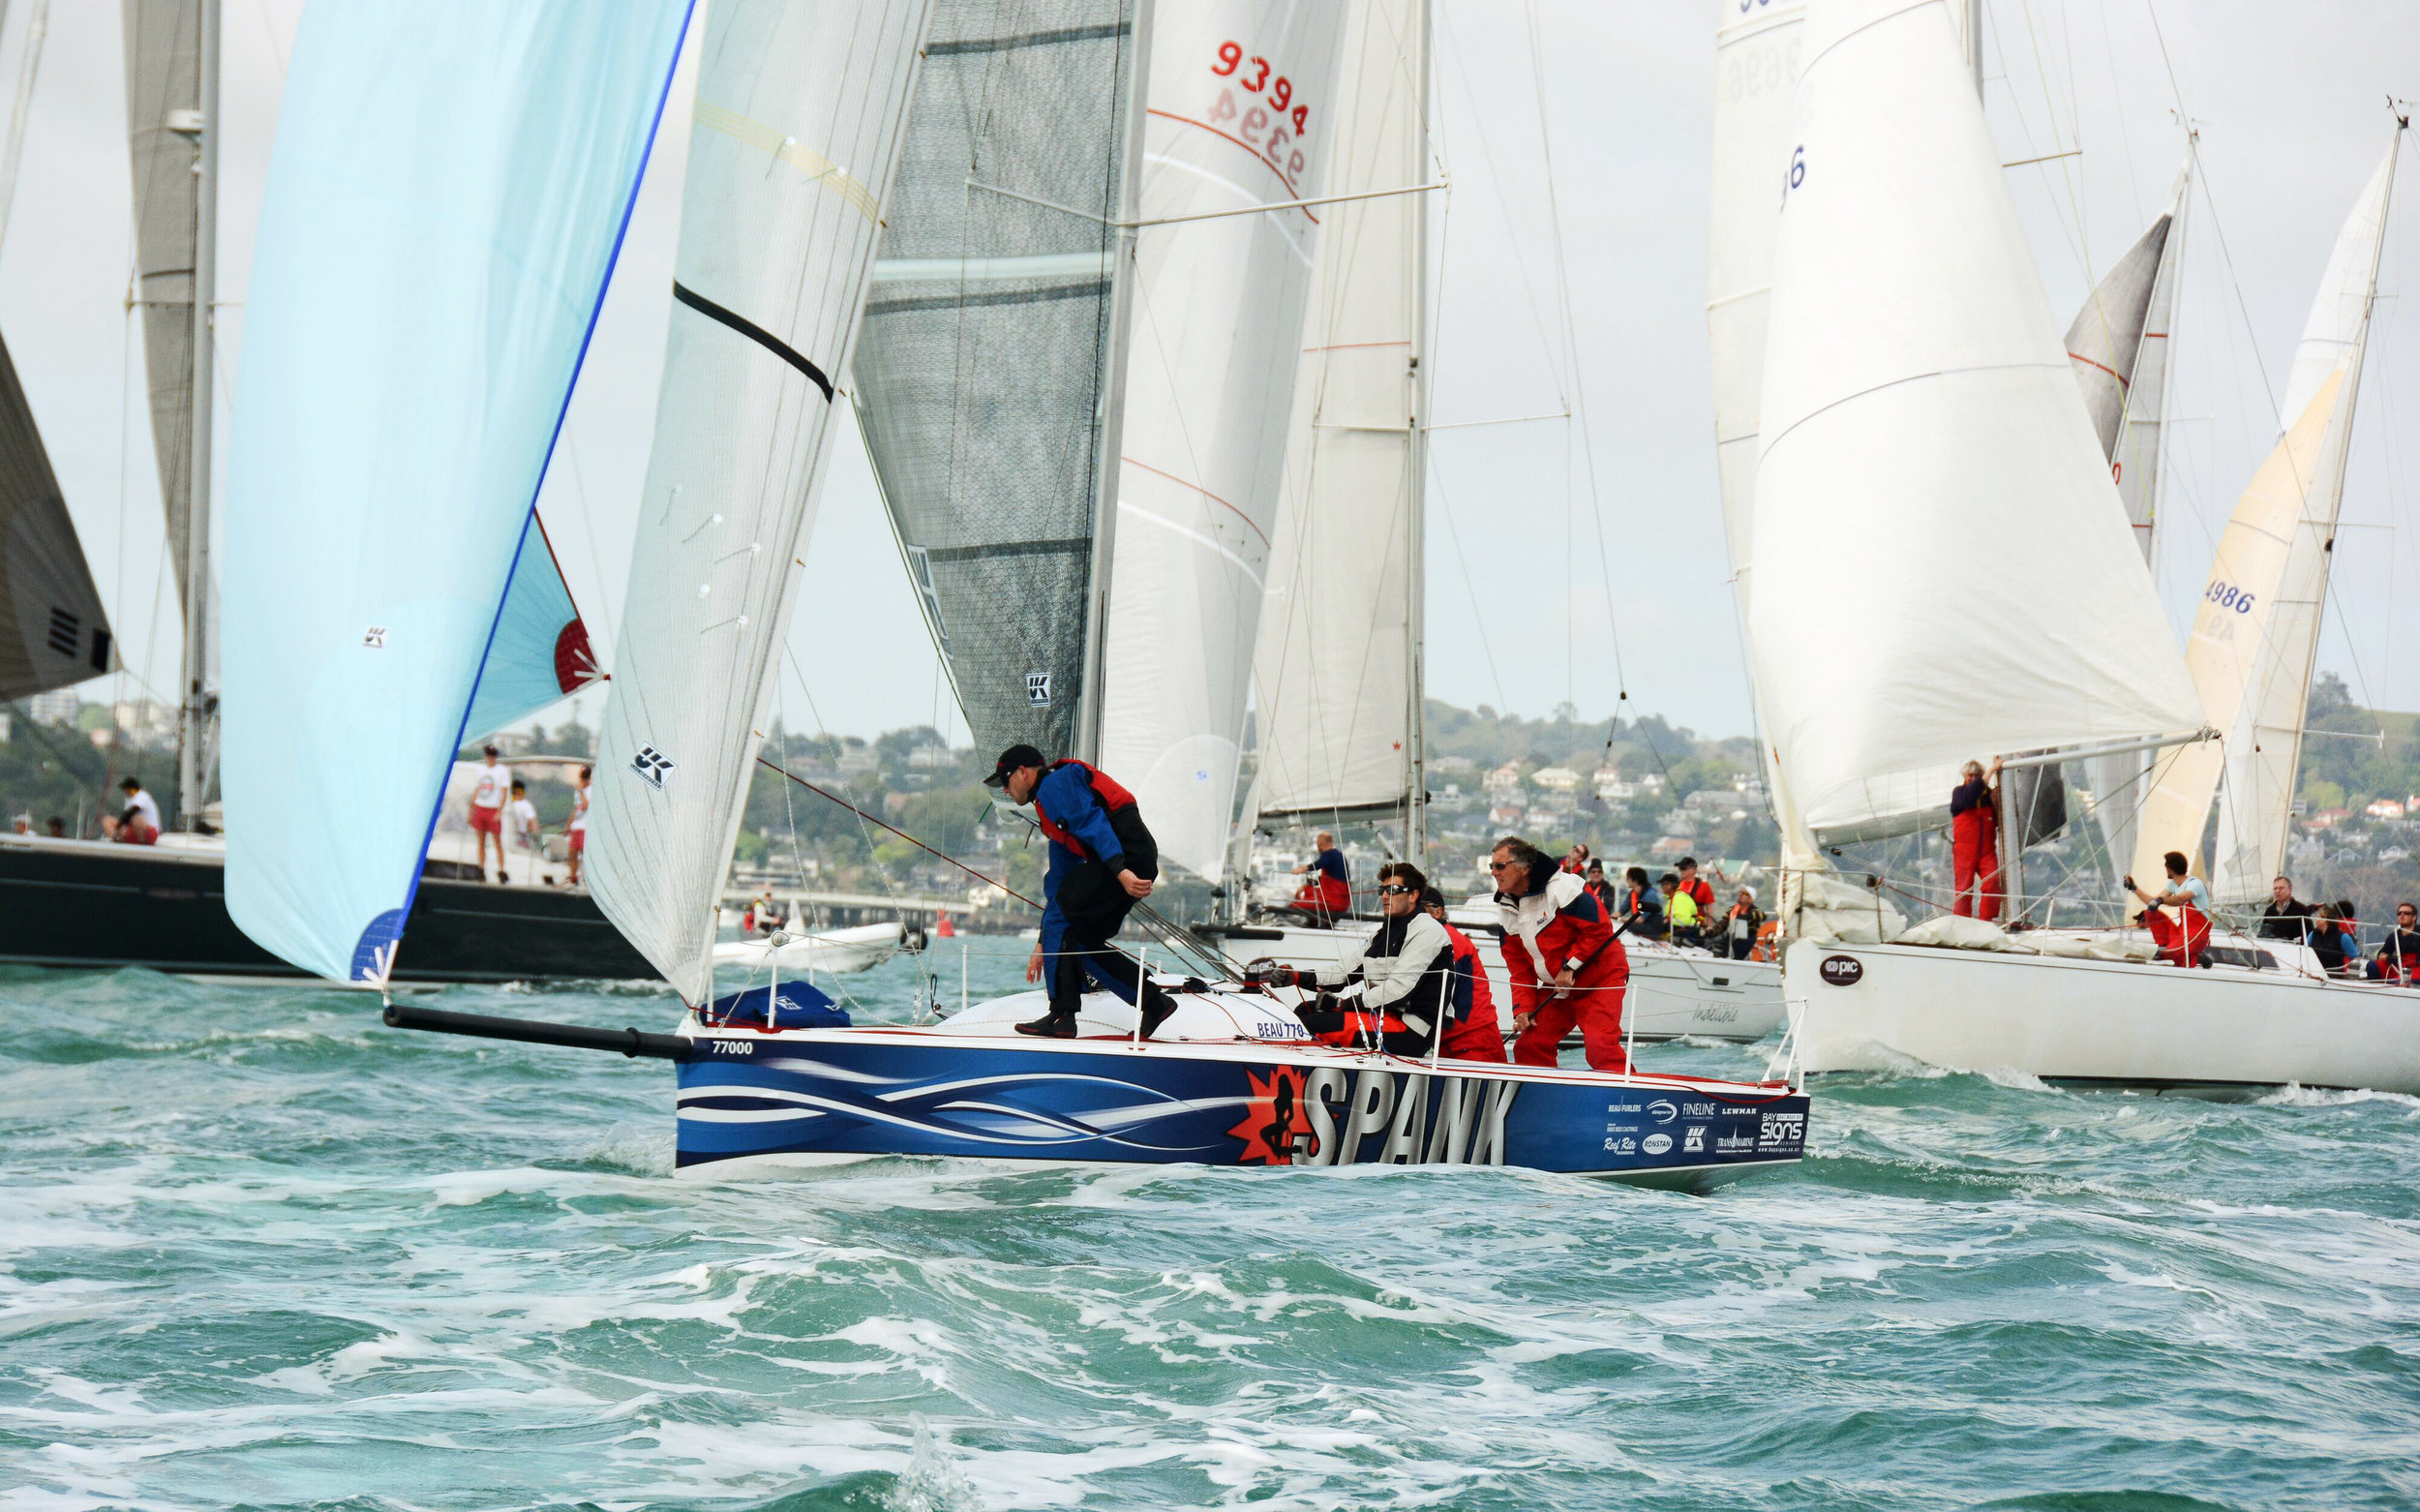 SPANK racing with her UK Sailmakers Titanium main, Tape-Drive genoa and asymmetrical spinnaker.